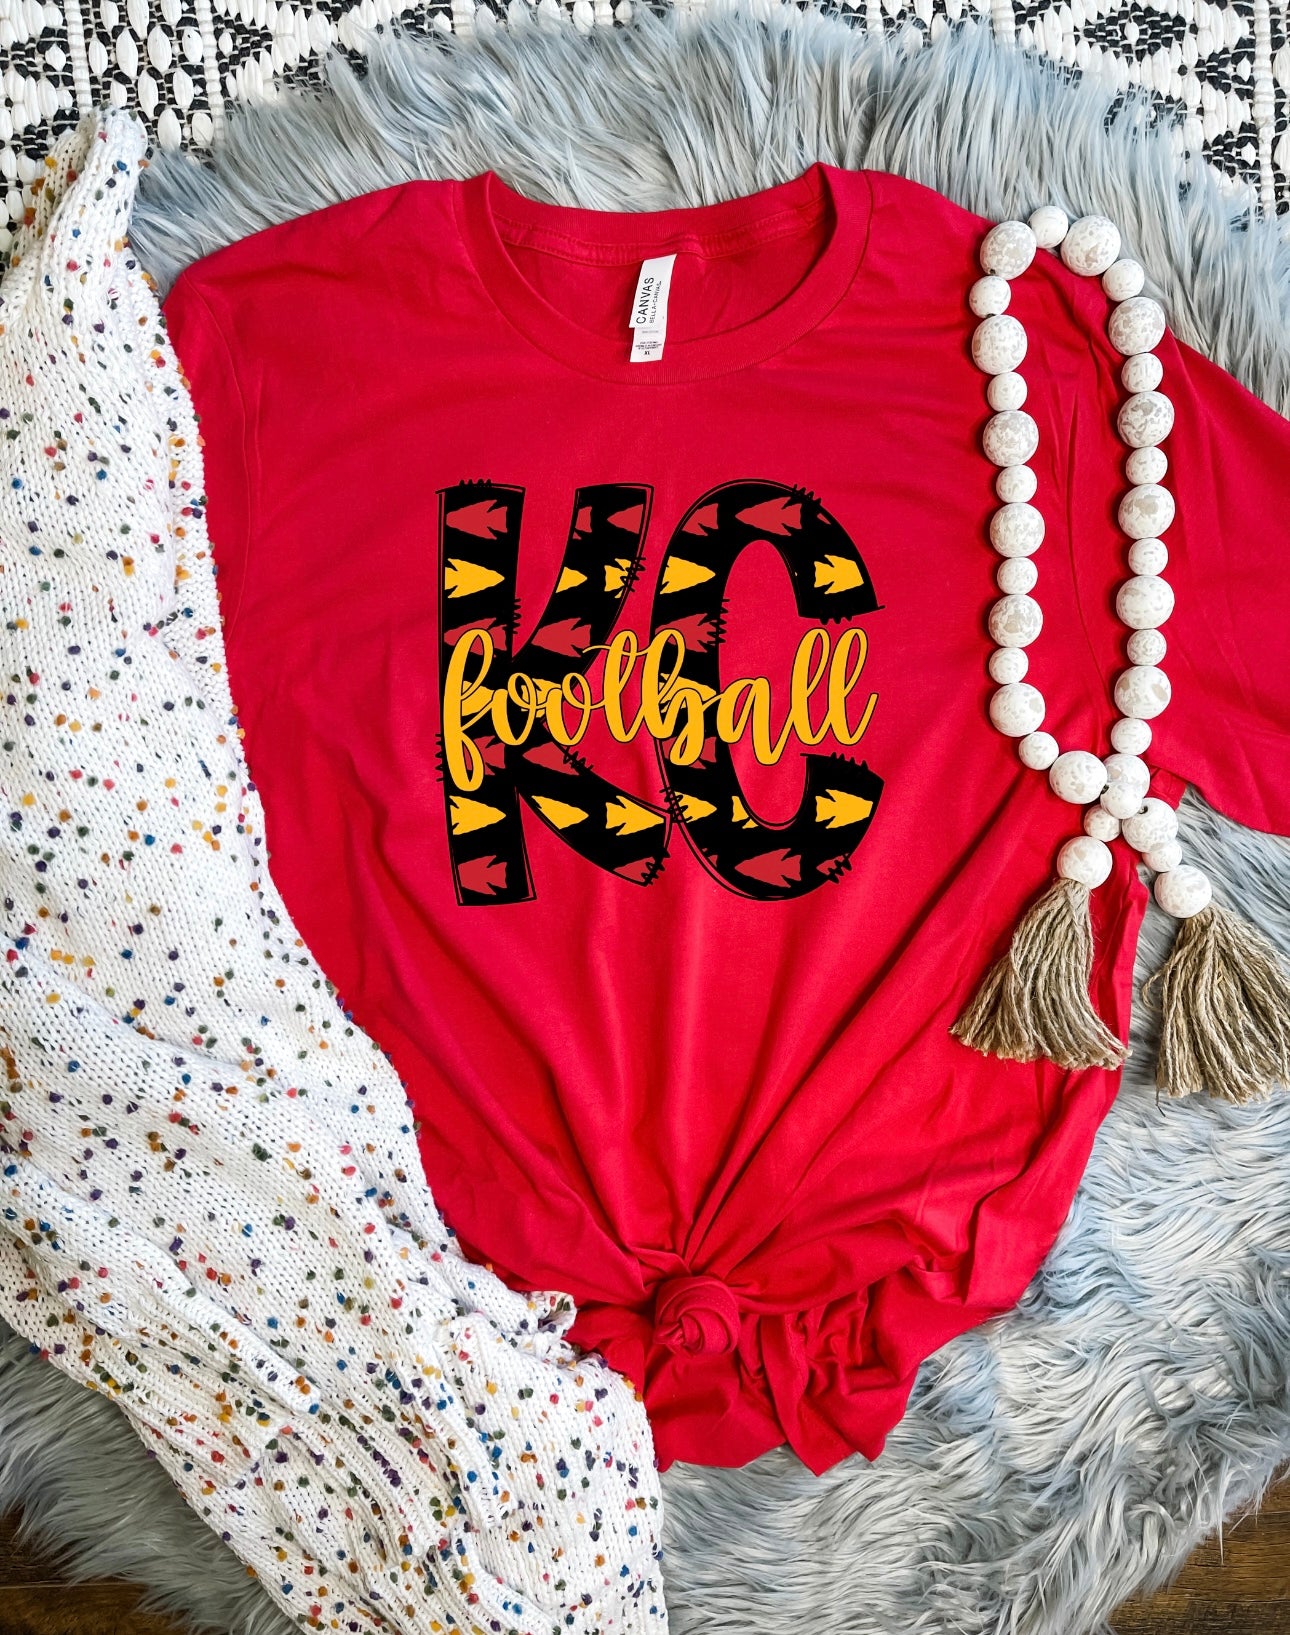 **HALFTIME DEAL** Red & Gold Arrowhead Red Tee